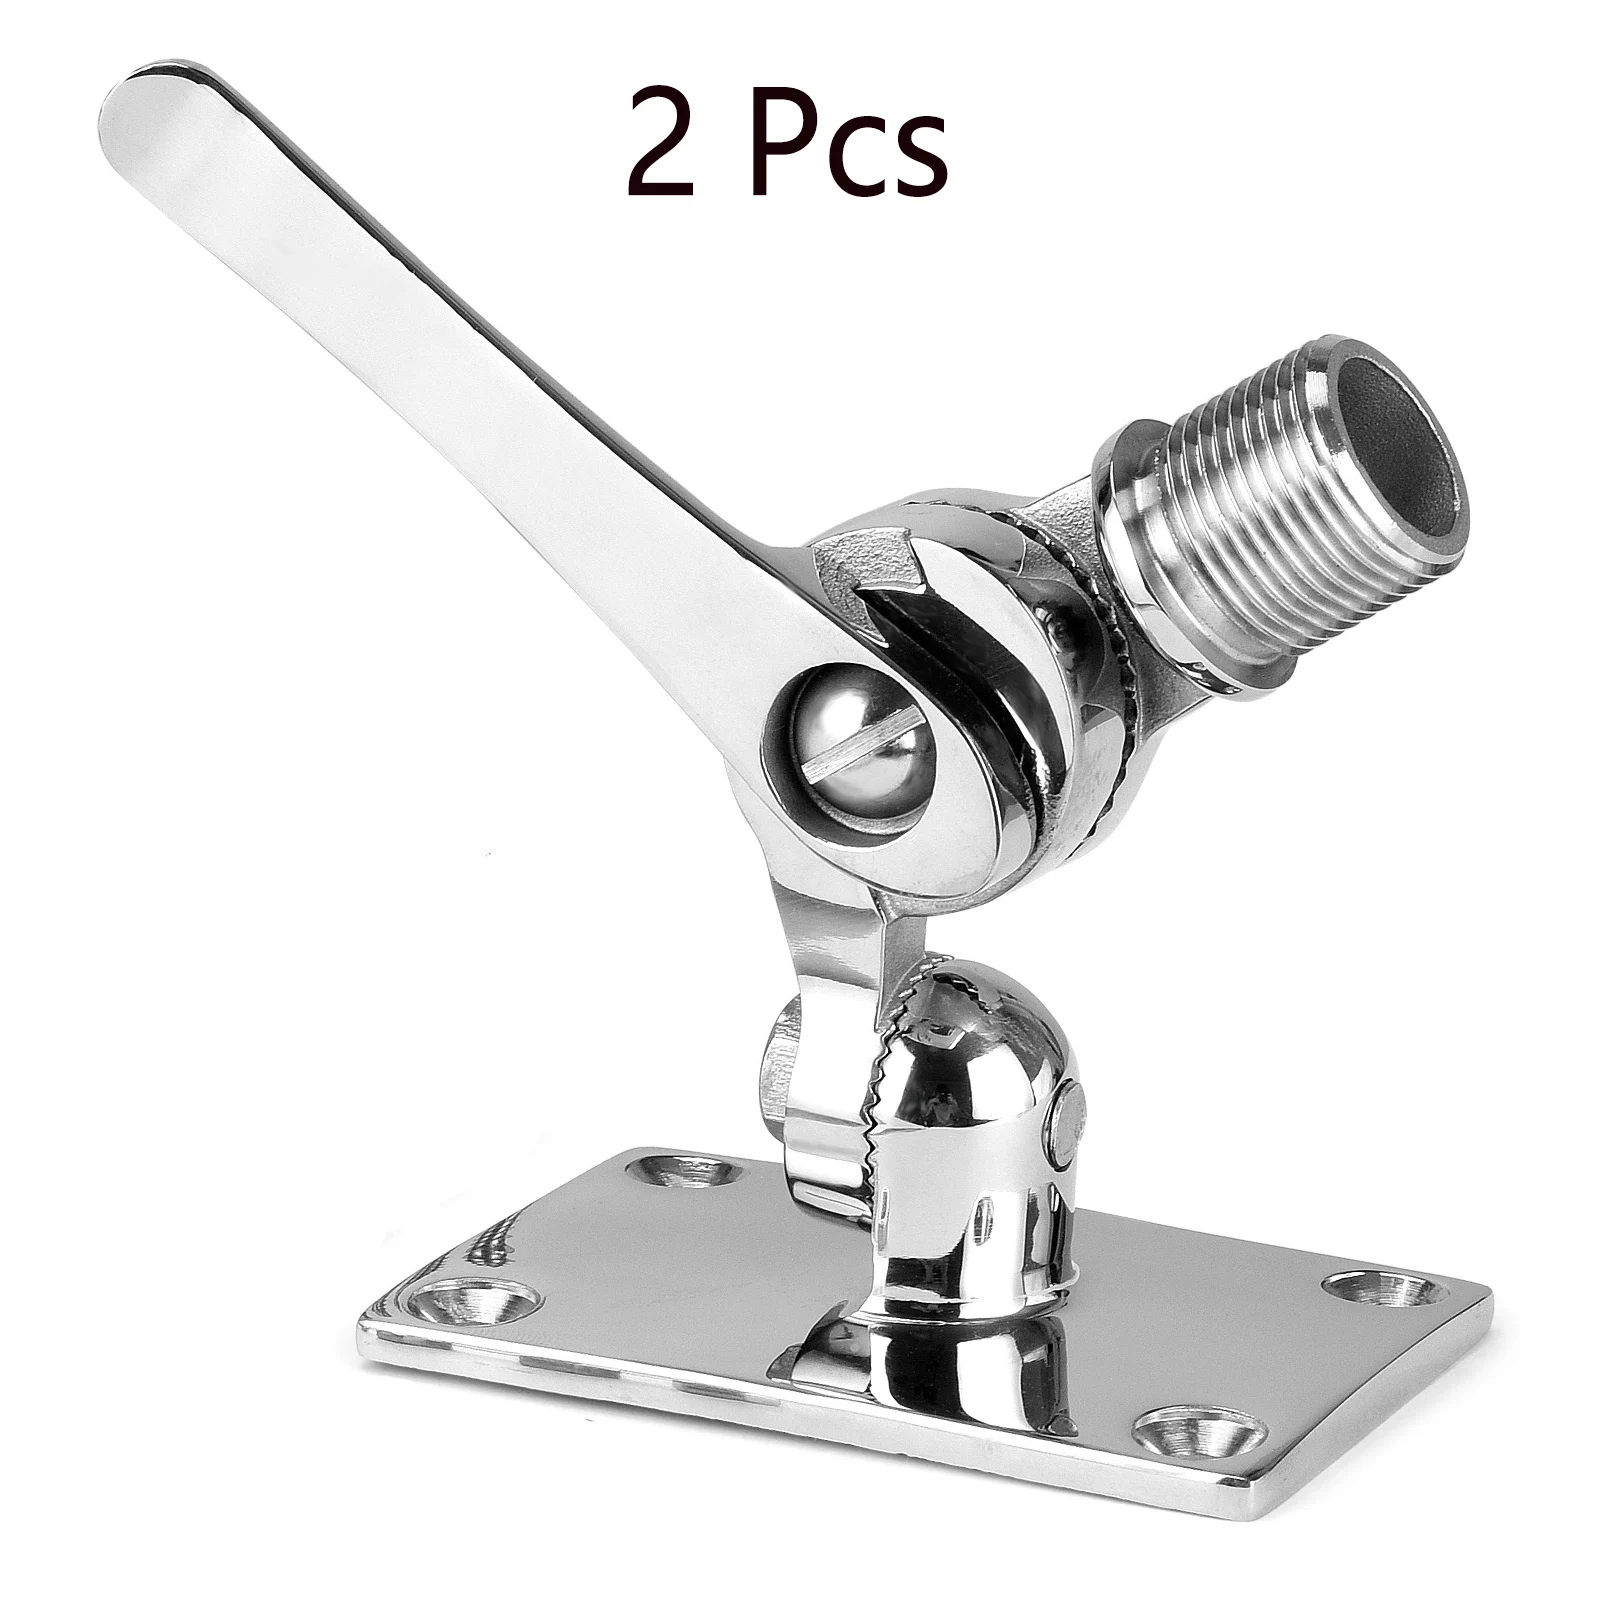 Marine VHF Antenna Mounts,  316 Stainless Steel Adjustable Base VHF Antenna Mount for Boat, Include Installation Screws,2 Pcs 10pcs advertisement standoffs bolts mount advertising stainless steel screws decorative mirror glass nail fastener 12x25mm